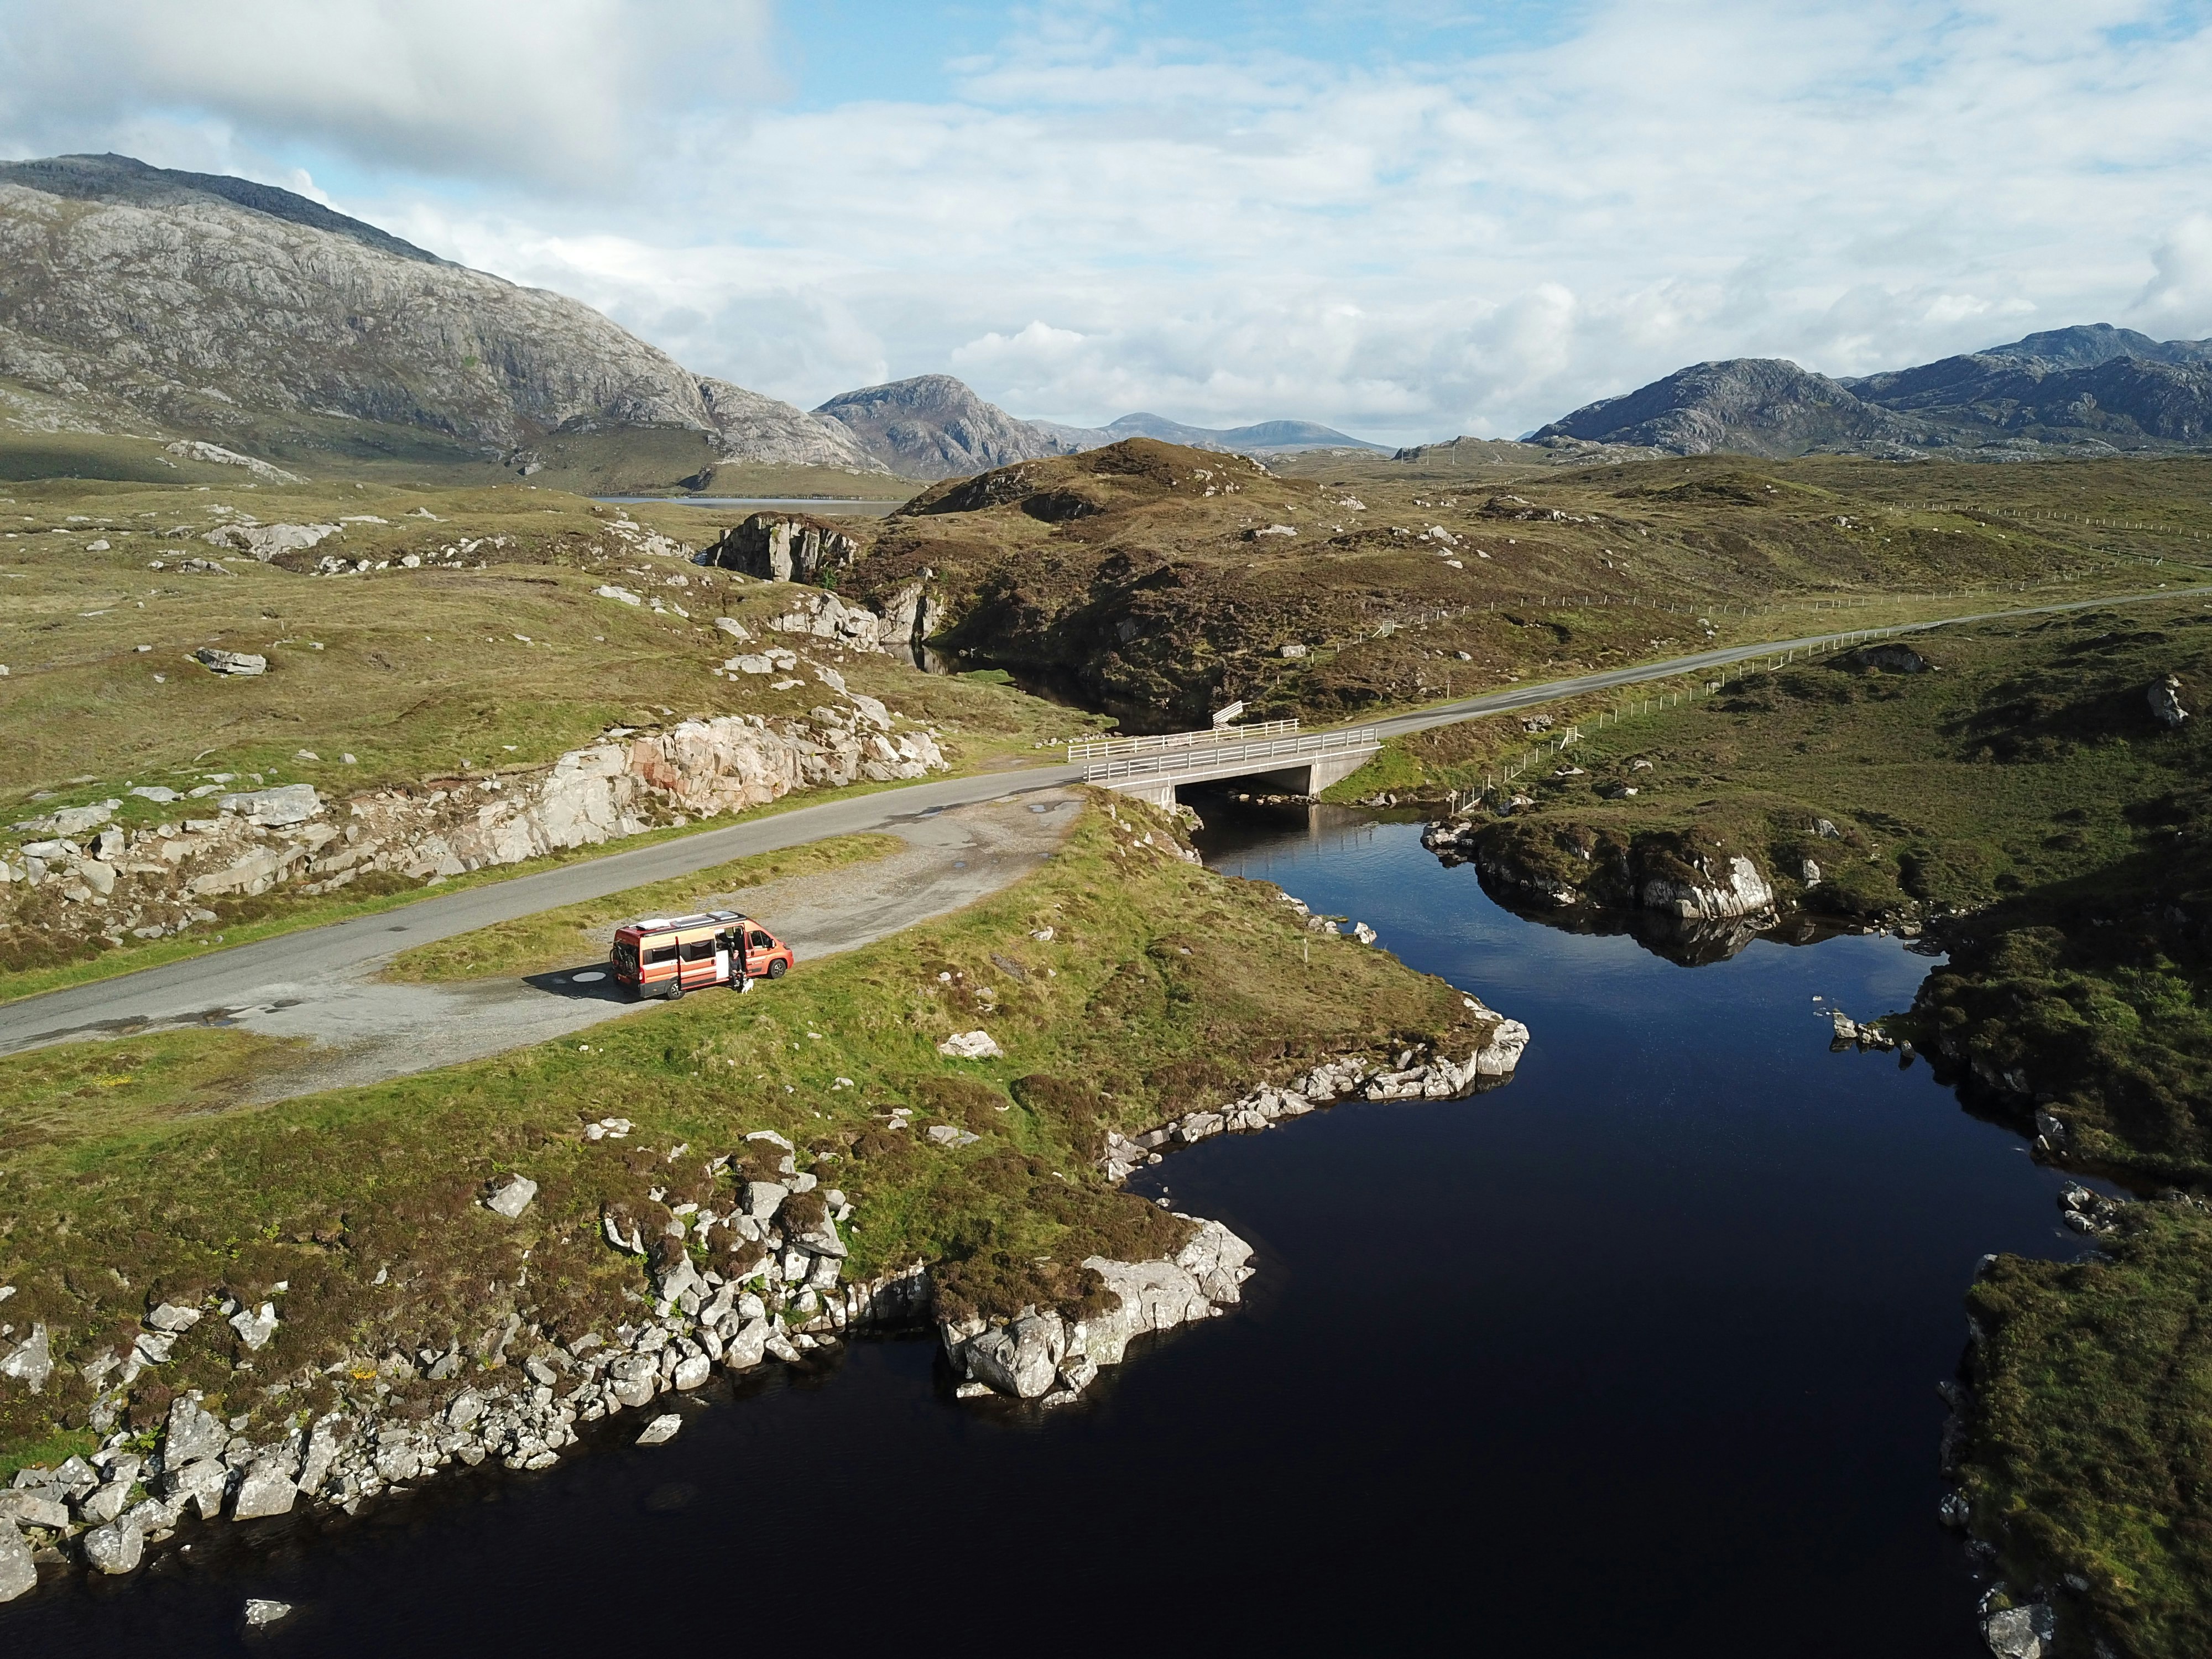 A drone image of Andrew with his van, parked up on a lay-by in Scotland. The van is parked on a patch of grass near the road, on the banks of a loch.